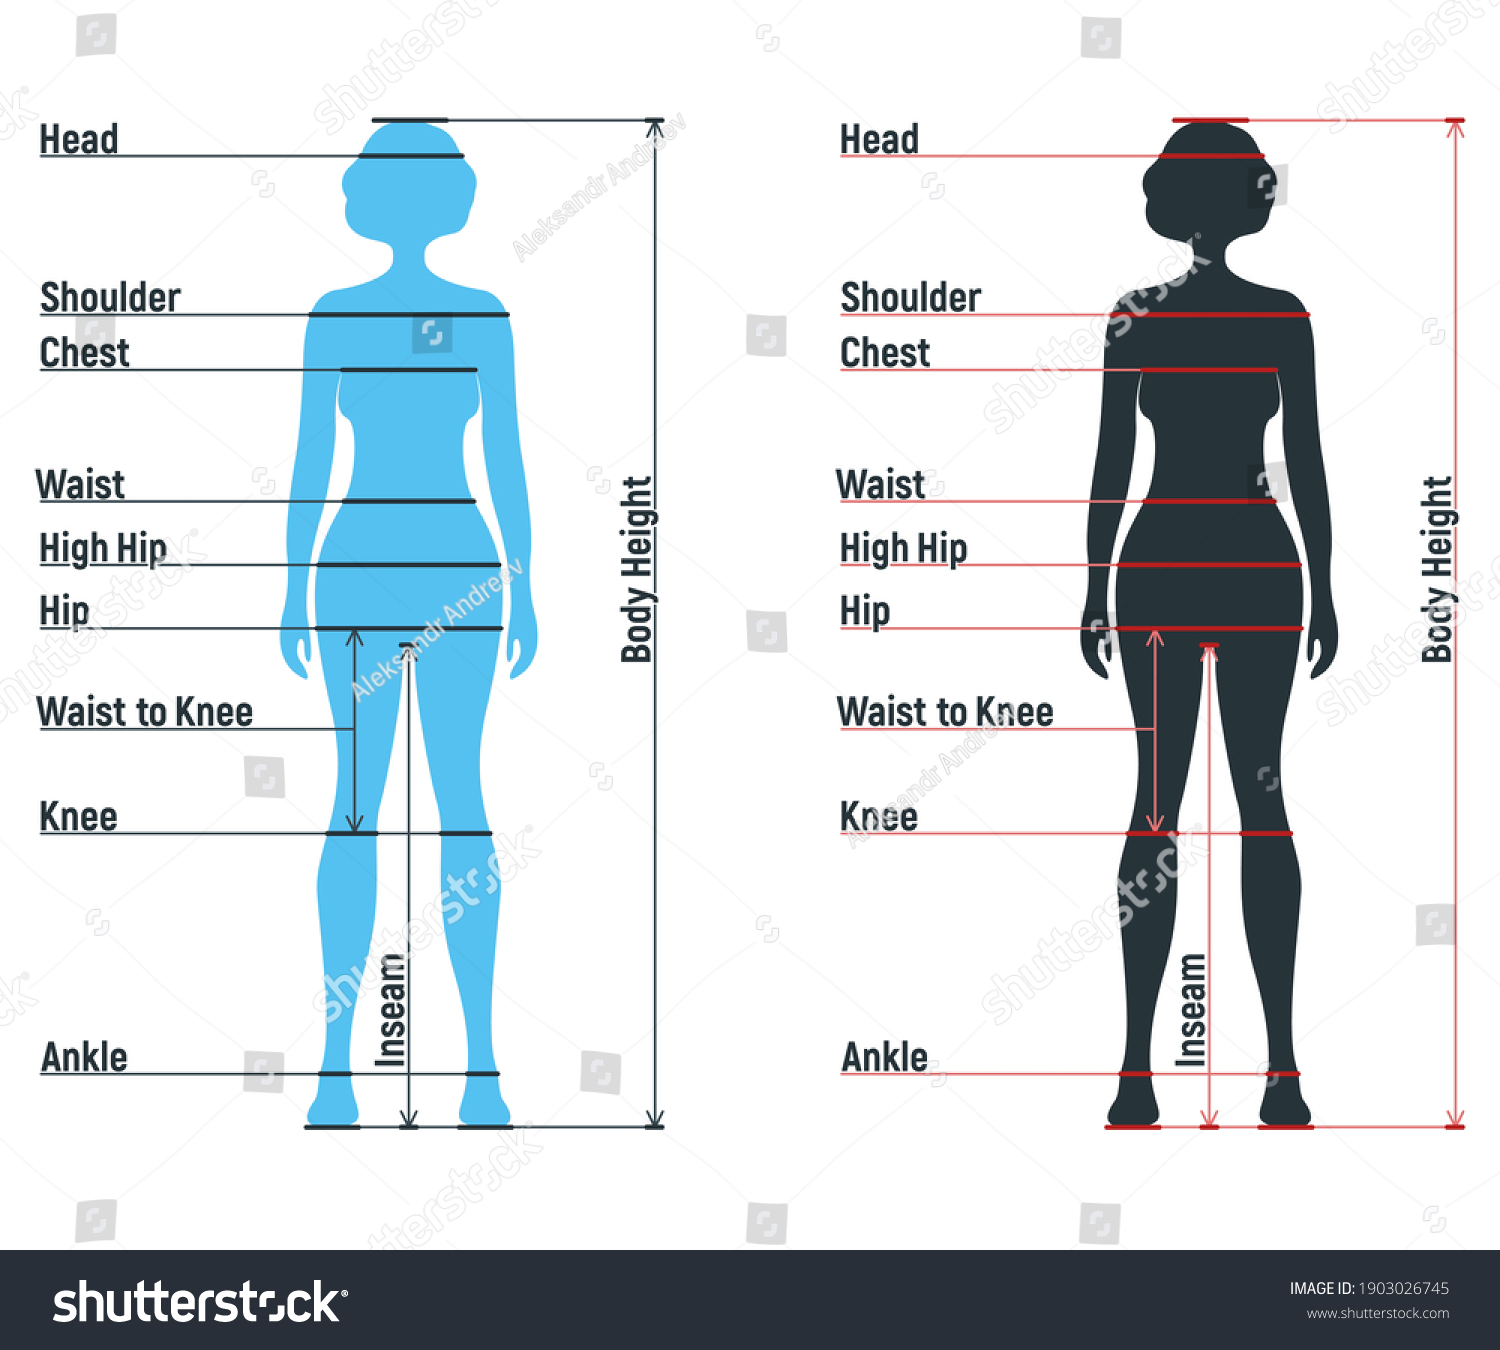 Female Size Chart Anatomy Human Character Stock Vector (Royalty Free ...